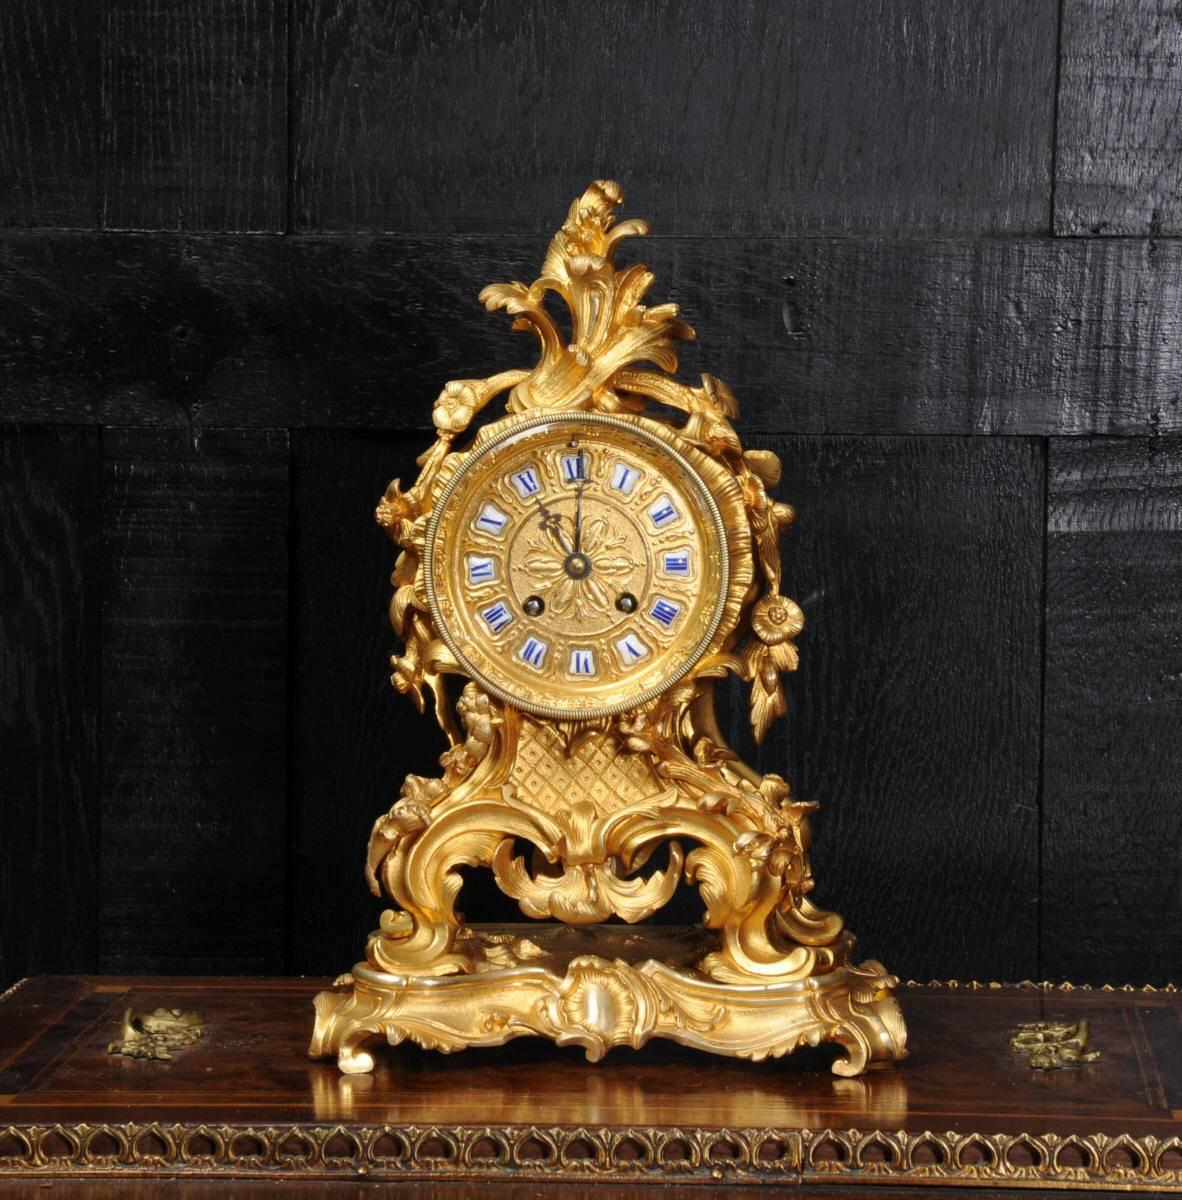 A fine and early ormolu (mercury gilded bronze) boudoir clock of small and delicate proportions. It is Rococo in style, decorated with elaborate flowing foliage, scrolls and floral swags. The gilding is in lovely condition, we have carefully removed